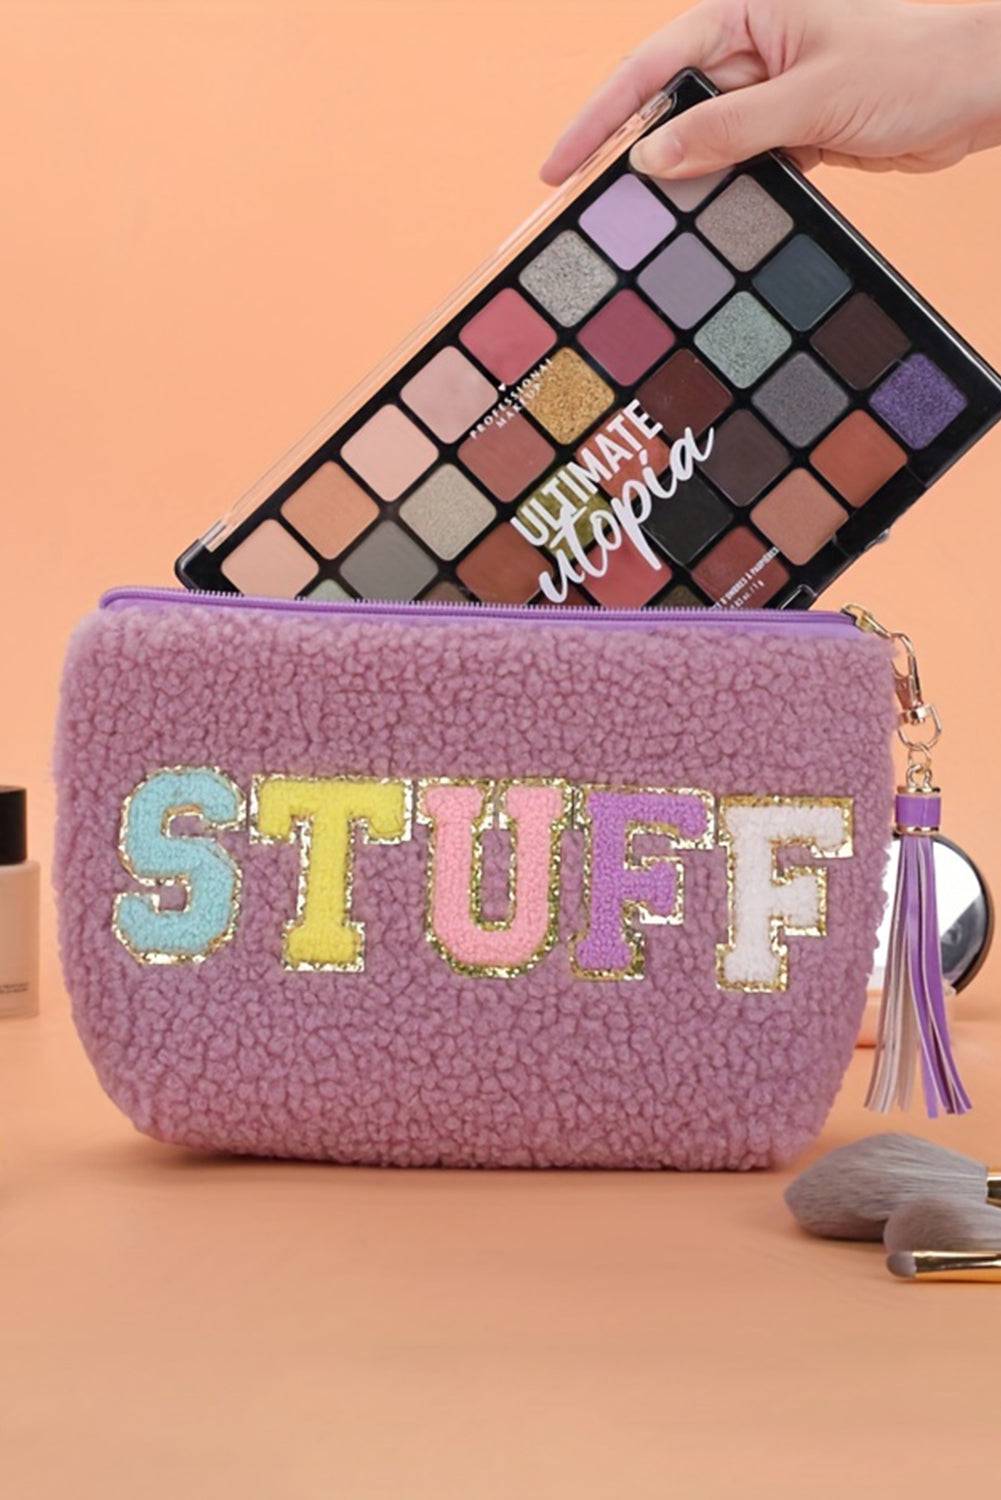 a person is holding a makeup bag with the word stuff on it